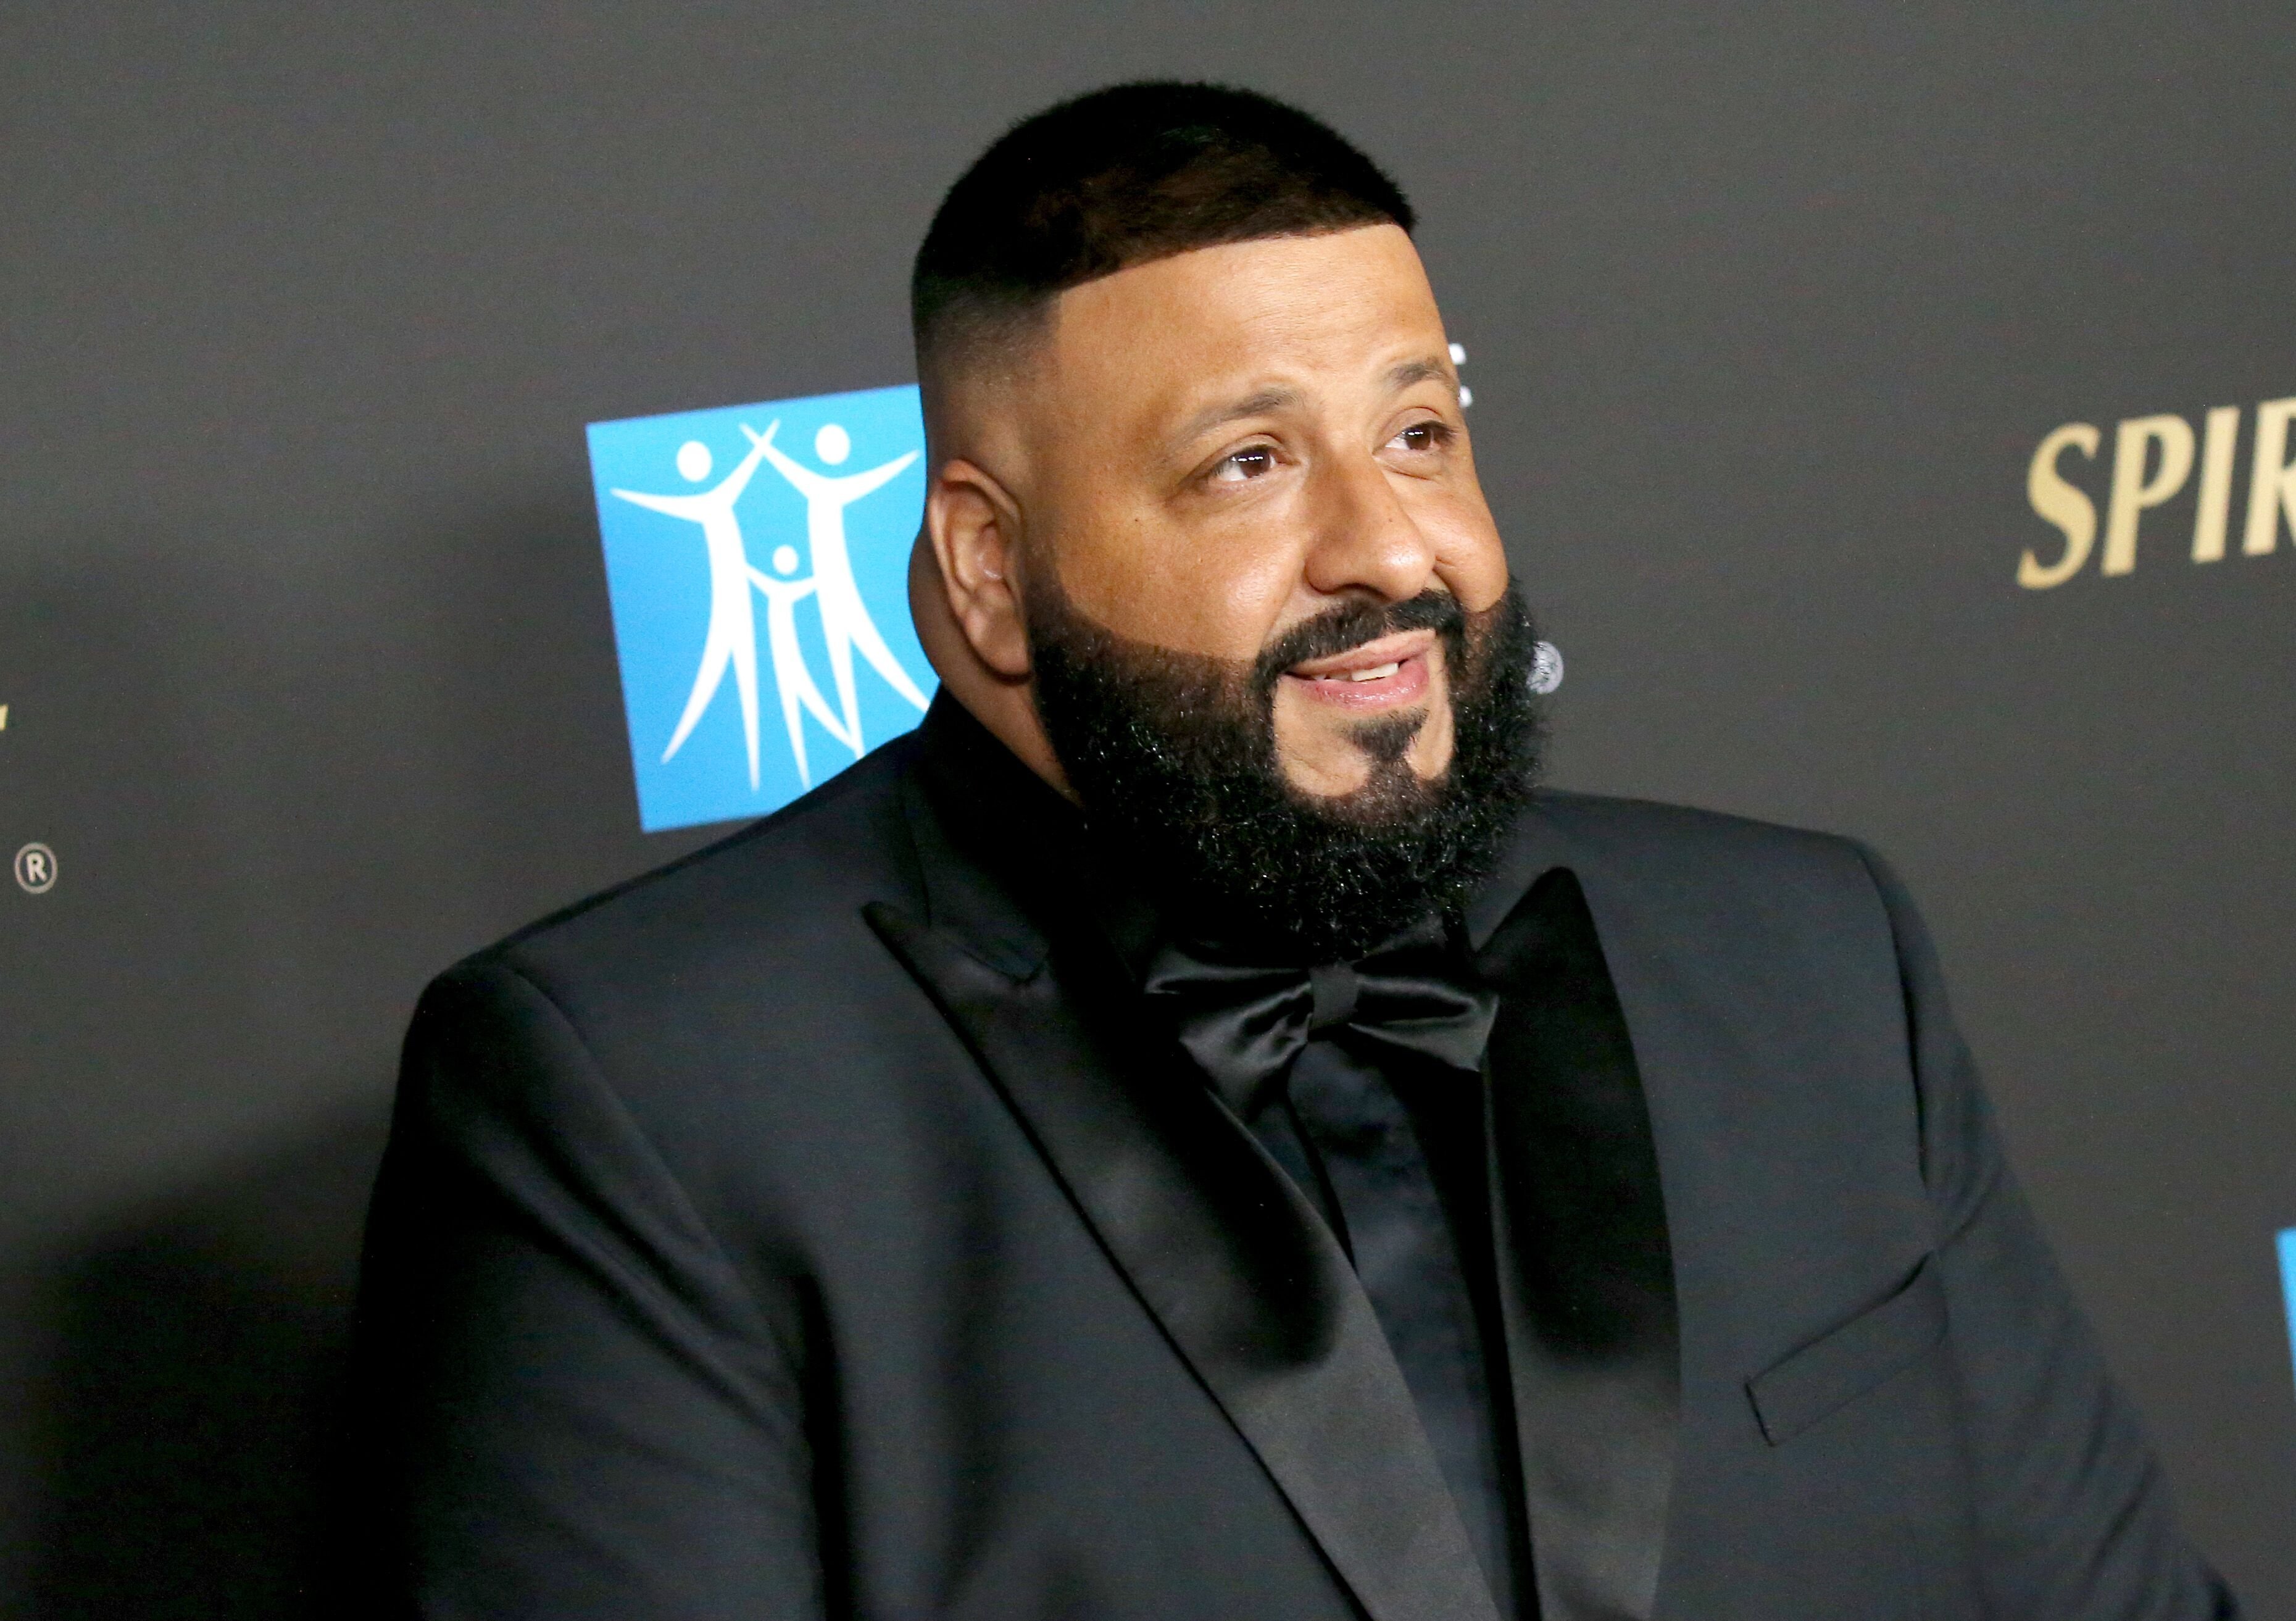 DJ Khaled attends the City Of Hope's Spirit of Life 2019 Gala on October 10, 2019 | Photo: Getty Images